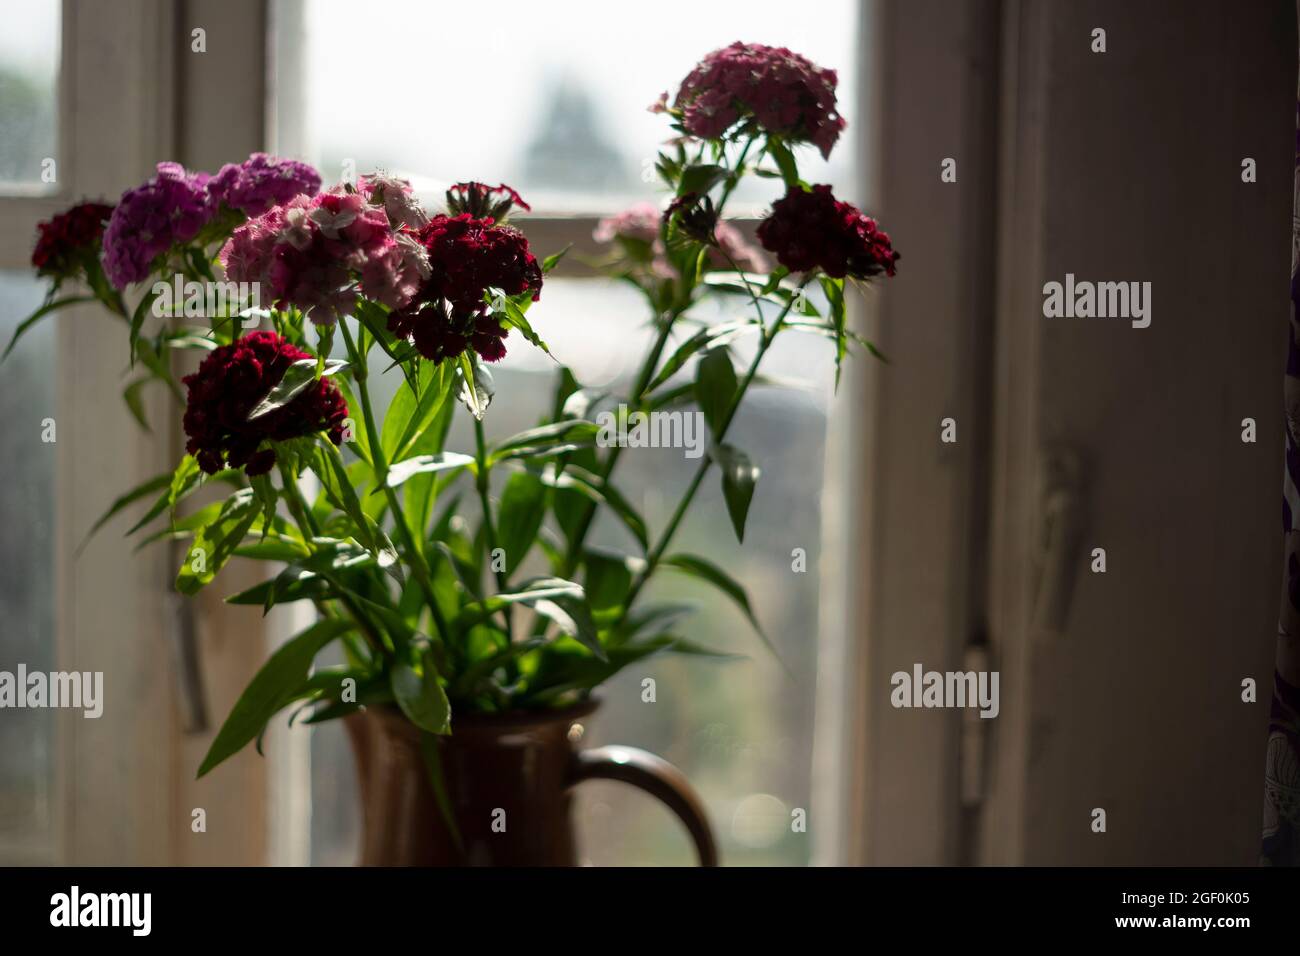 Defocused sweet williams flowers bouquet in blurred window background. Close up Stock Photo